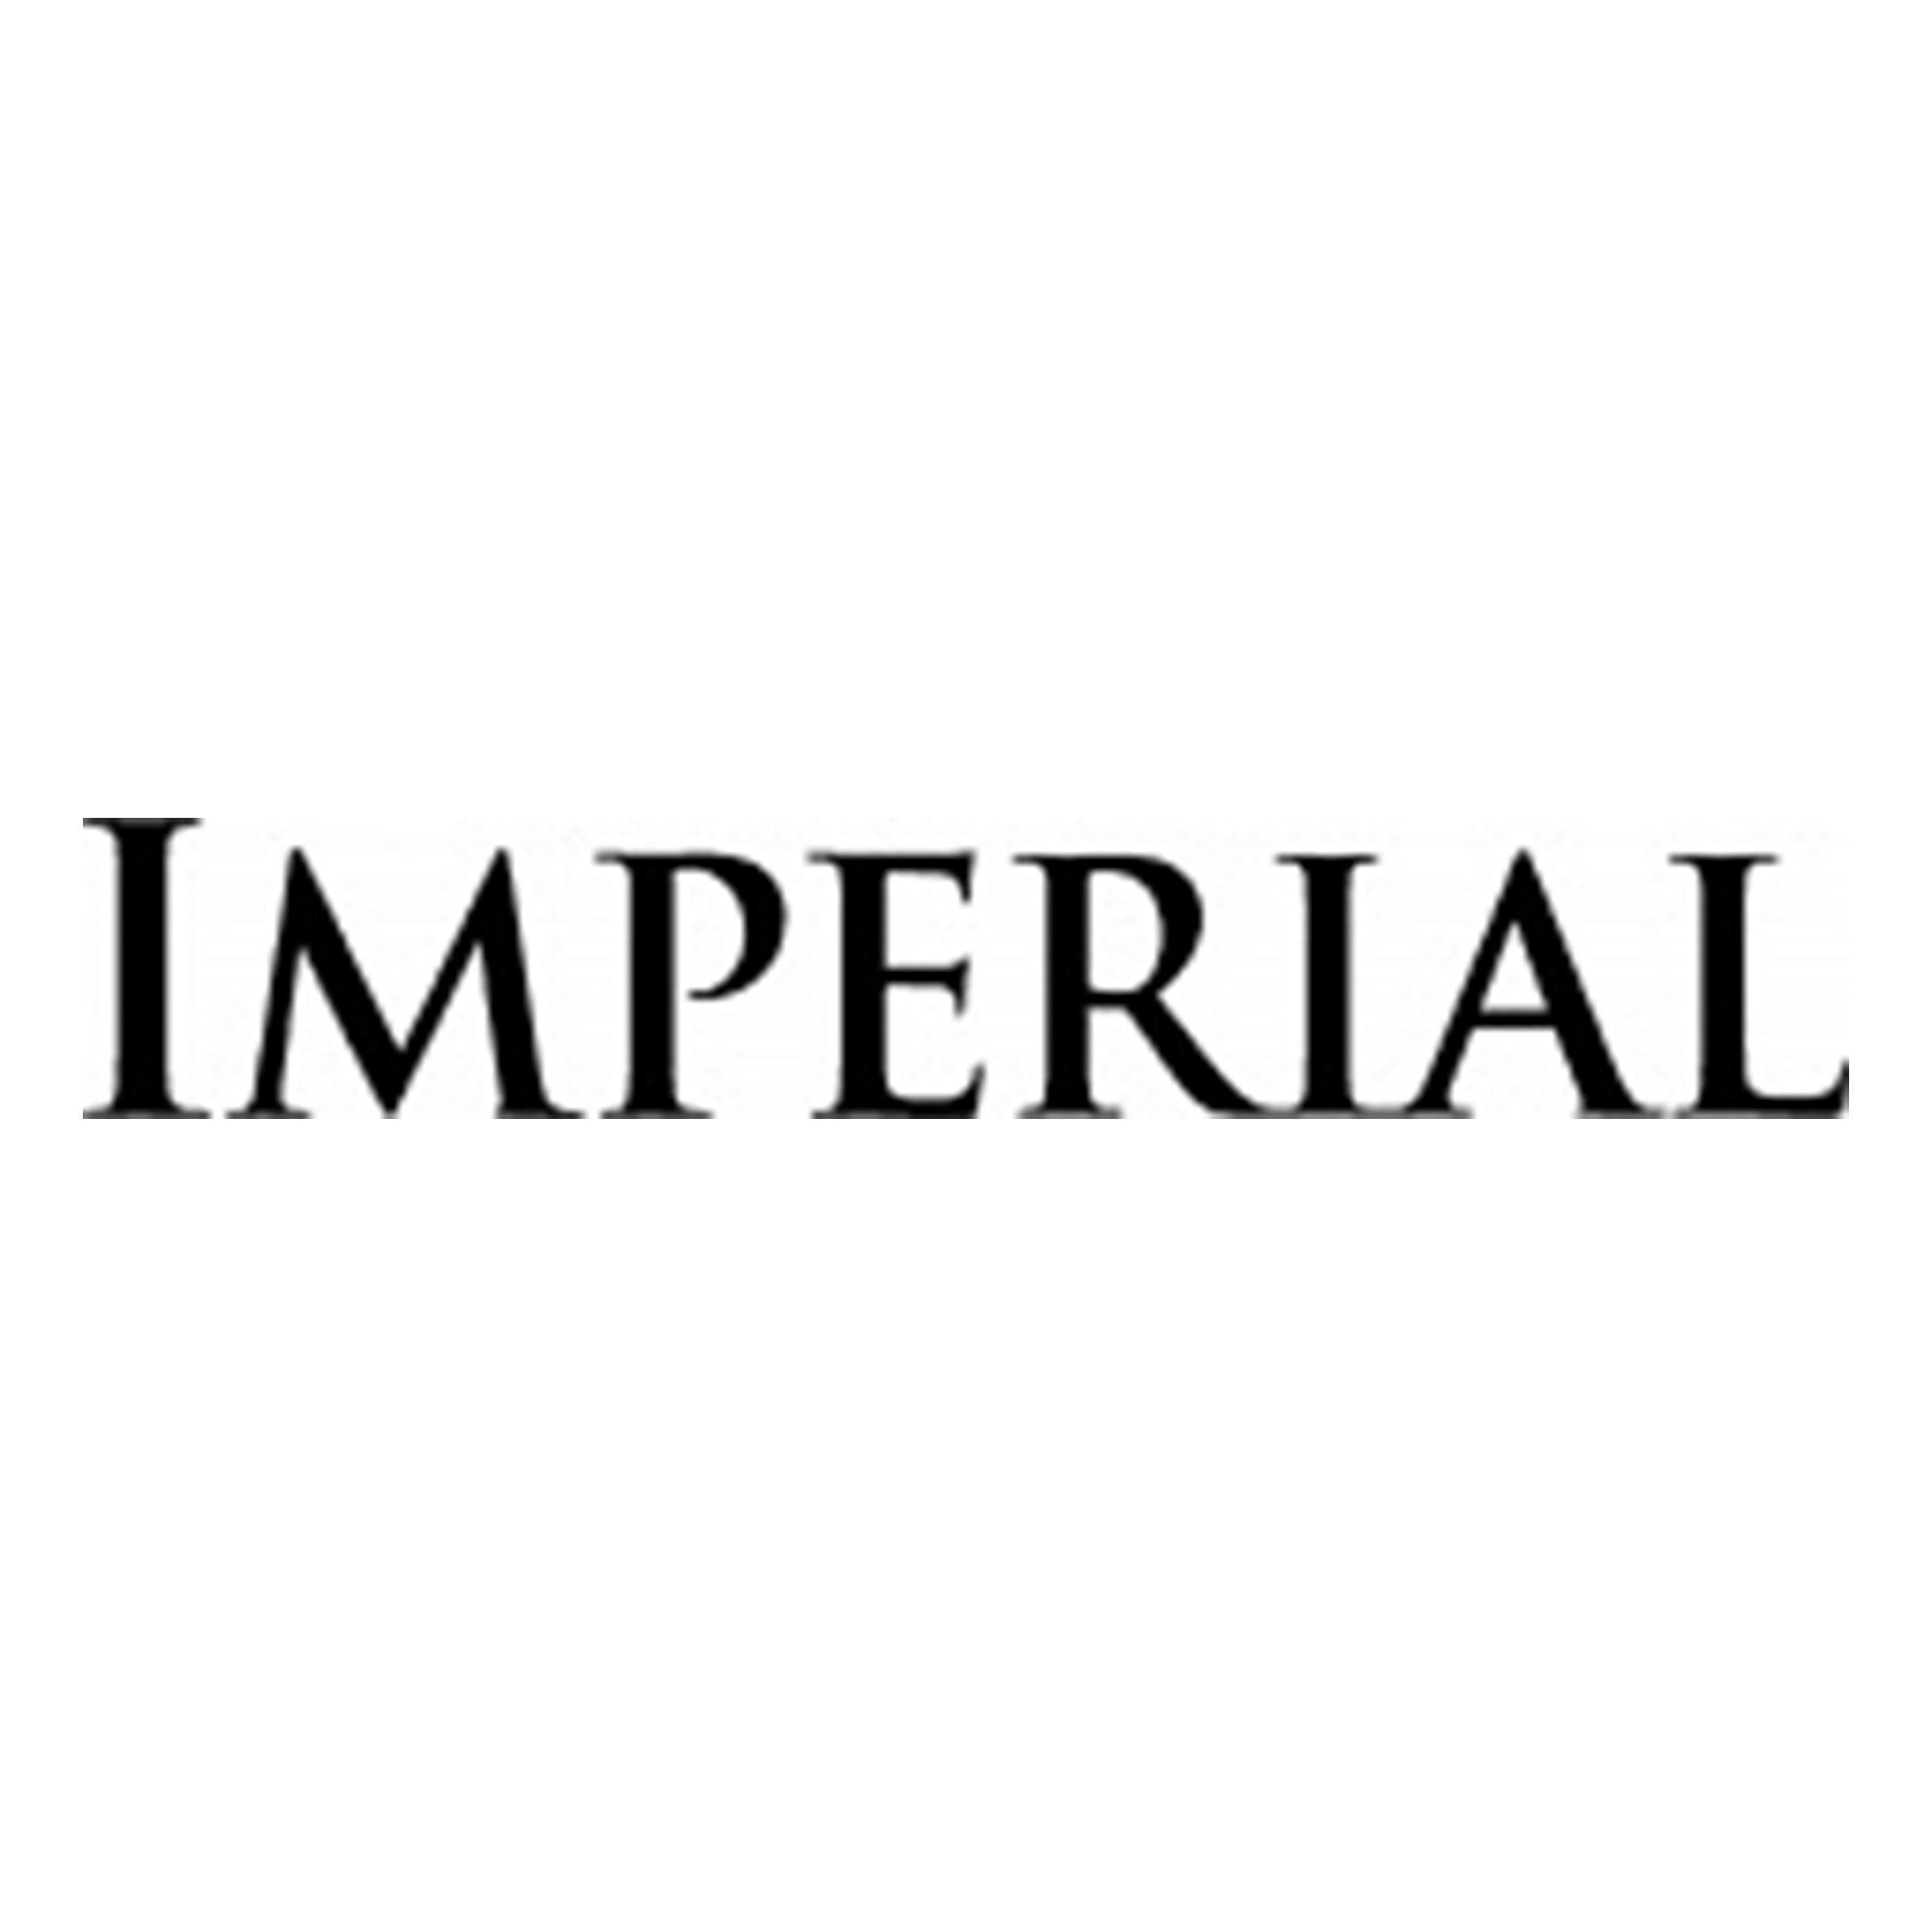 A_Imperial